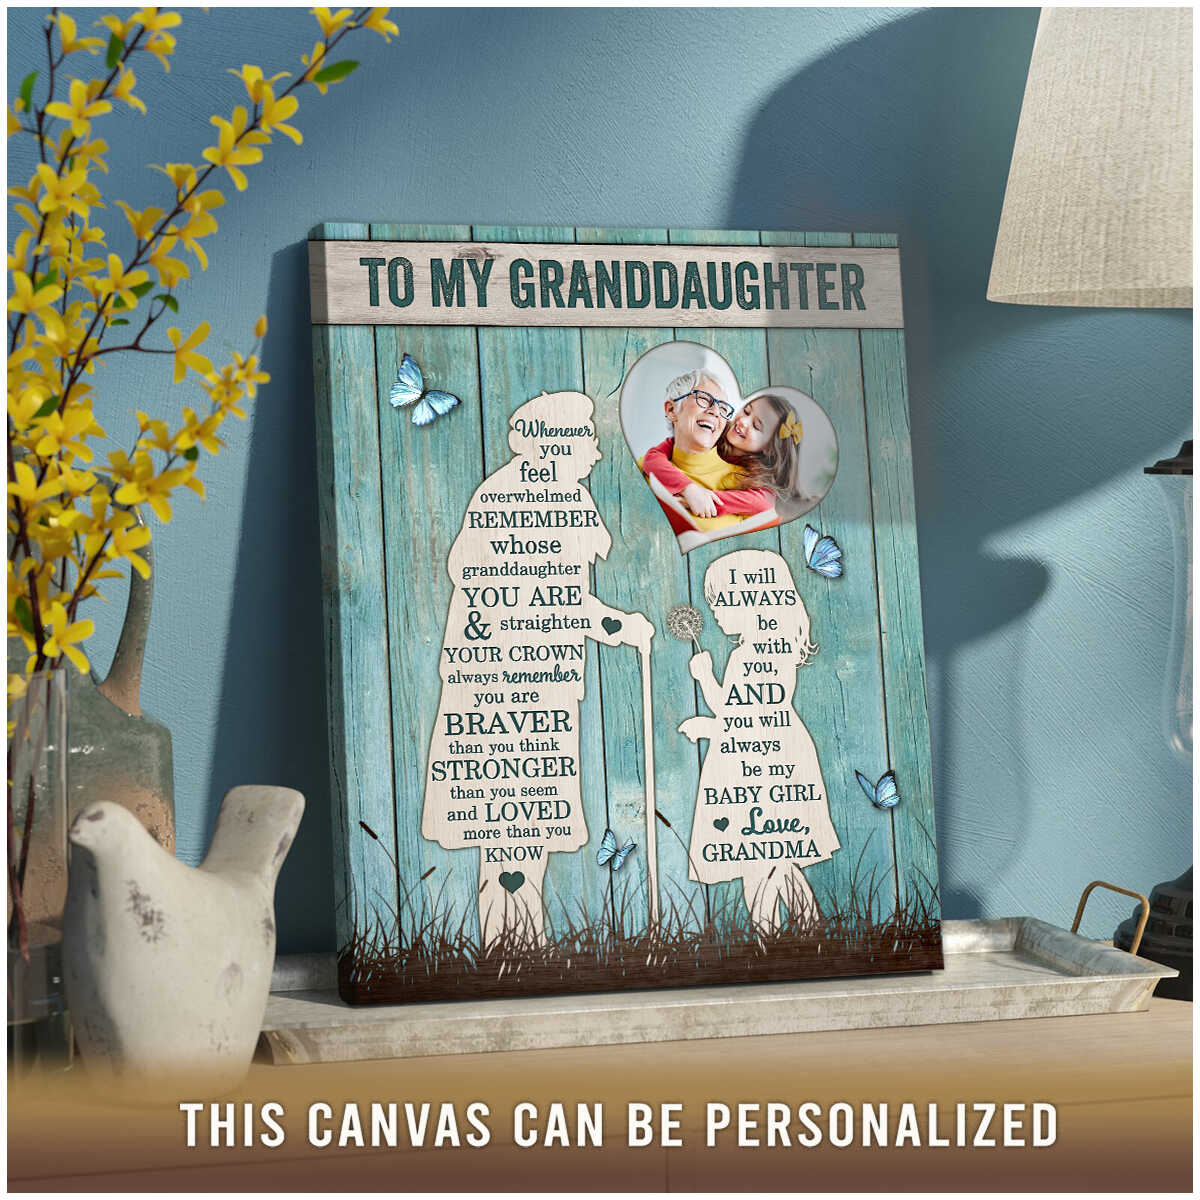 https://images.ohcanvas.com/ohcanvas_com/2022/07/08025944/unique-gift-for-granddaughter-quotes-to-granddaughter-from-grandma-print-canvas-02.jpg